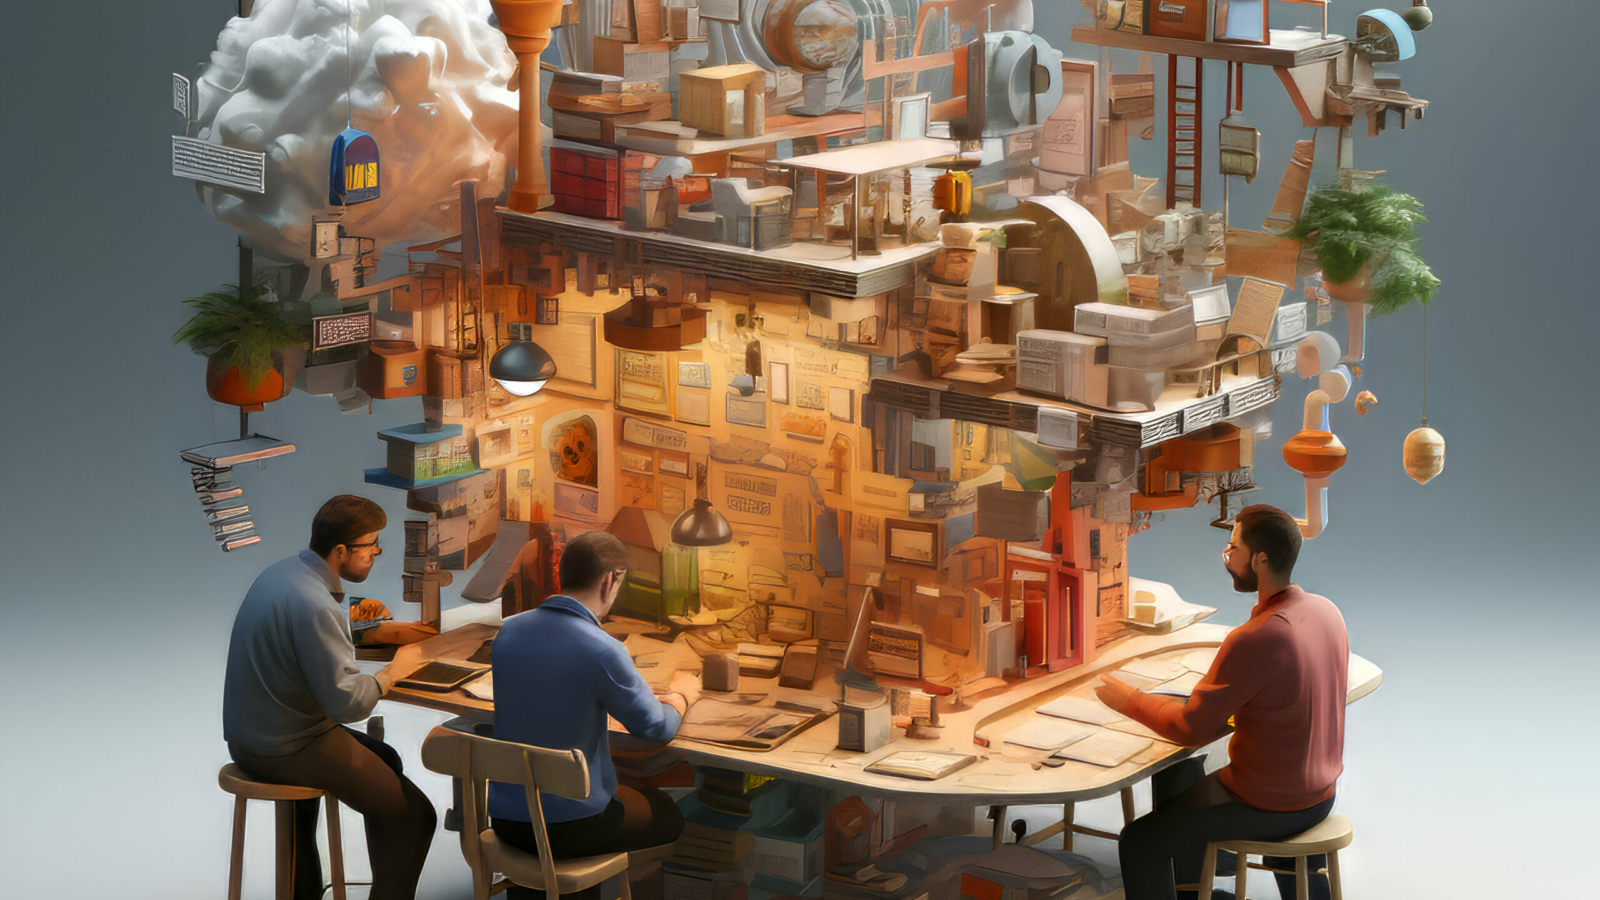 3d illustration of group of people sitting at table and working on creative building